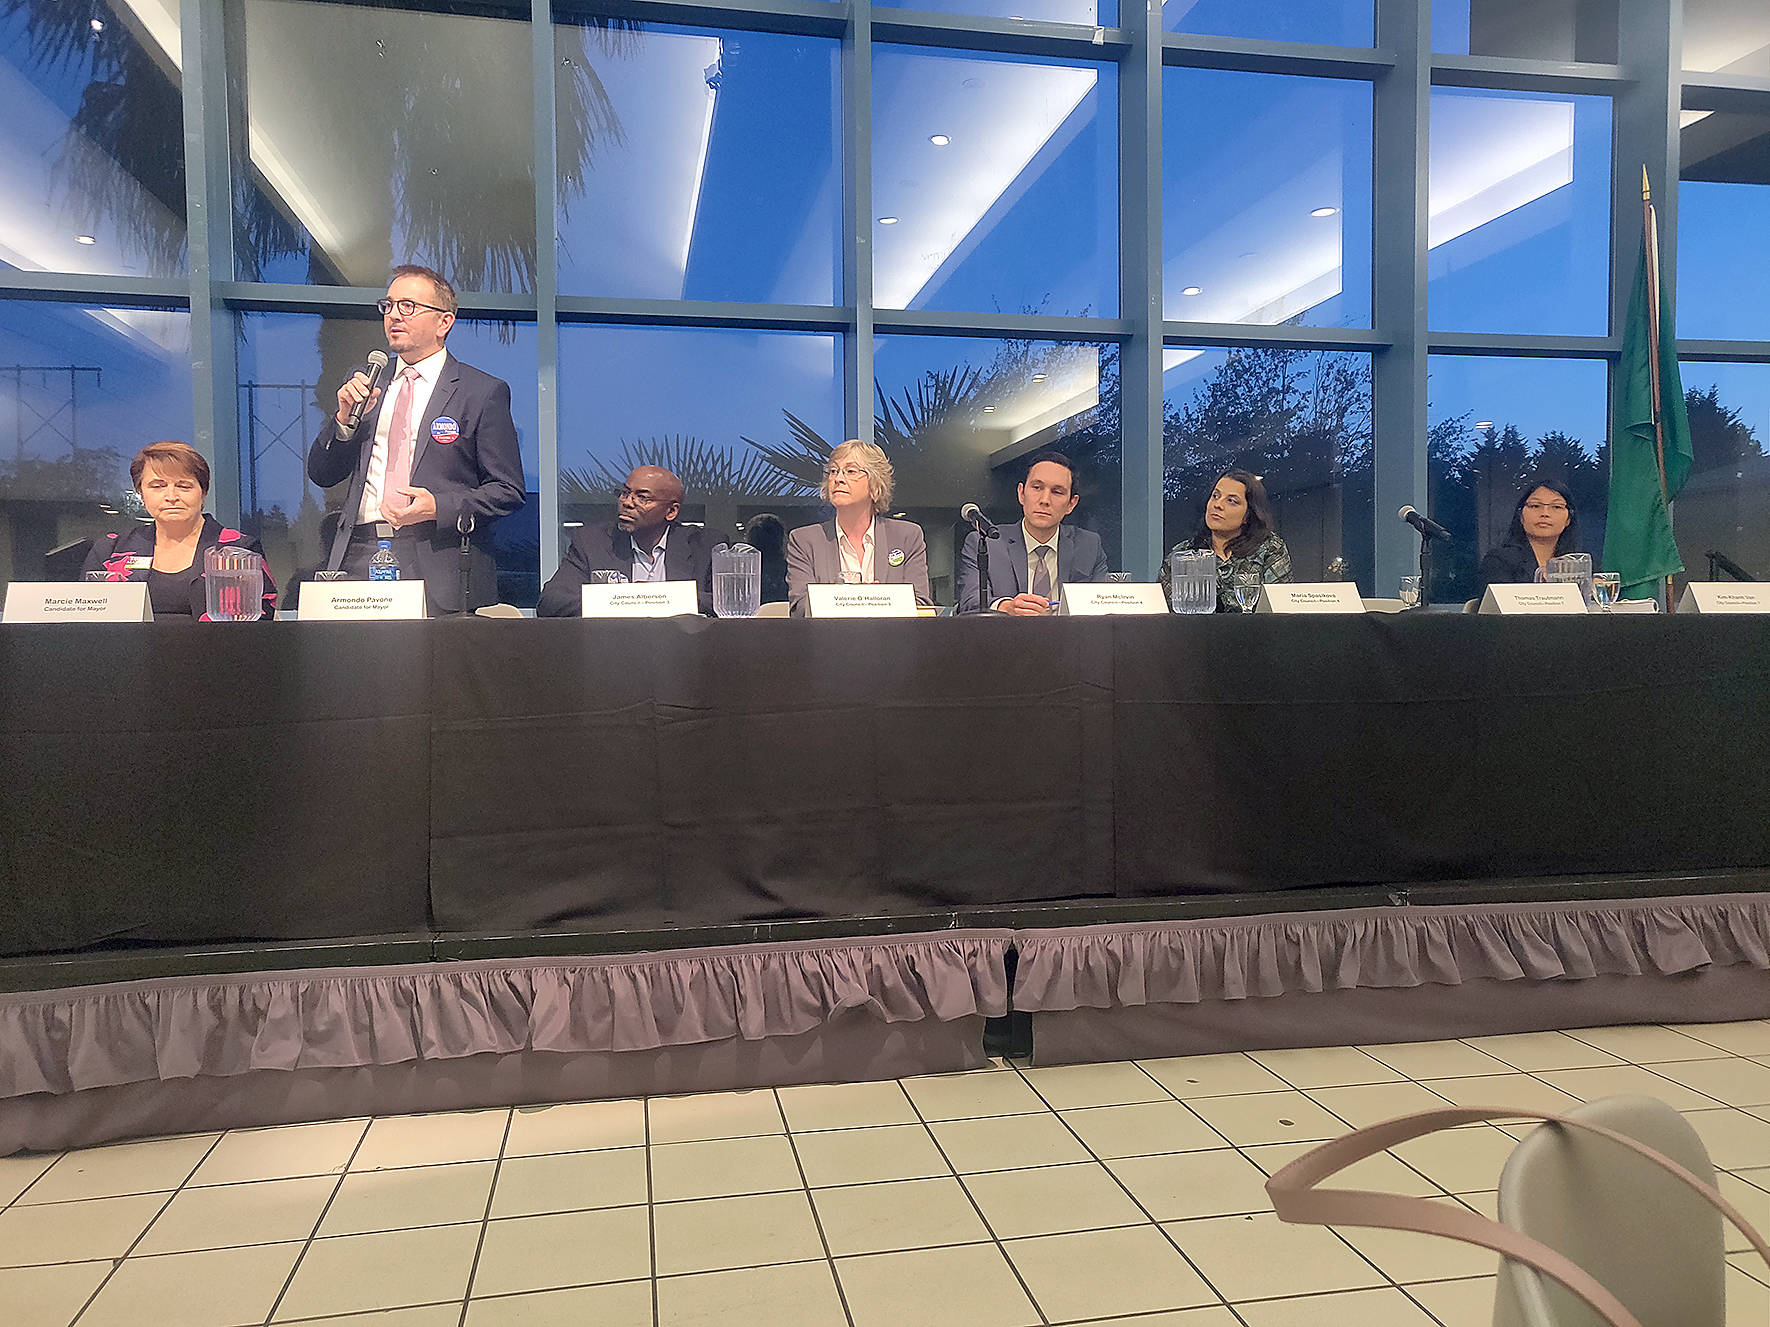 Candidates face voters at forum